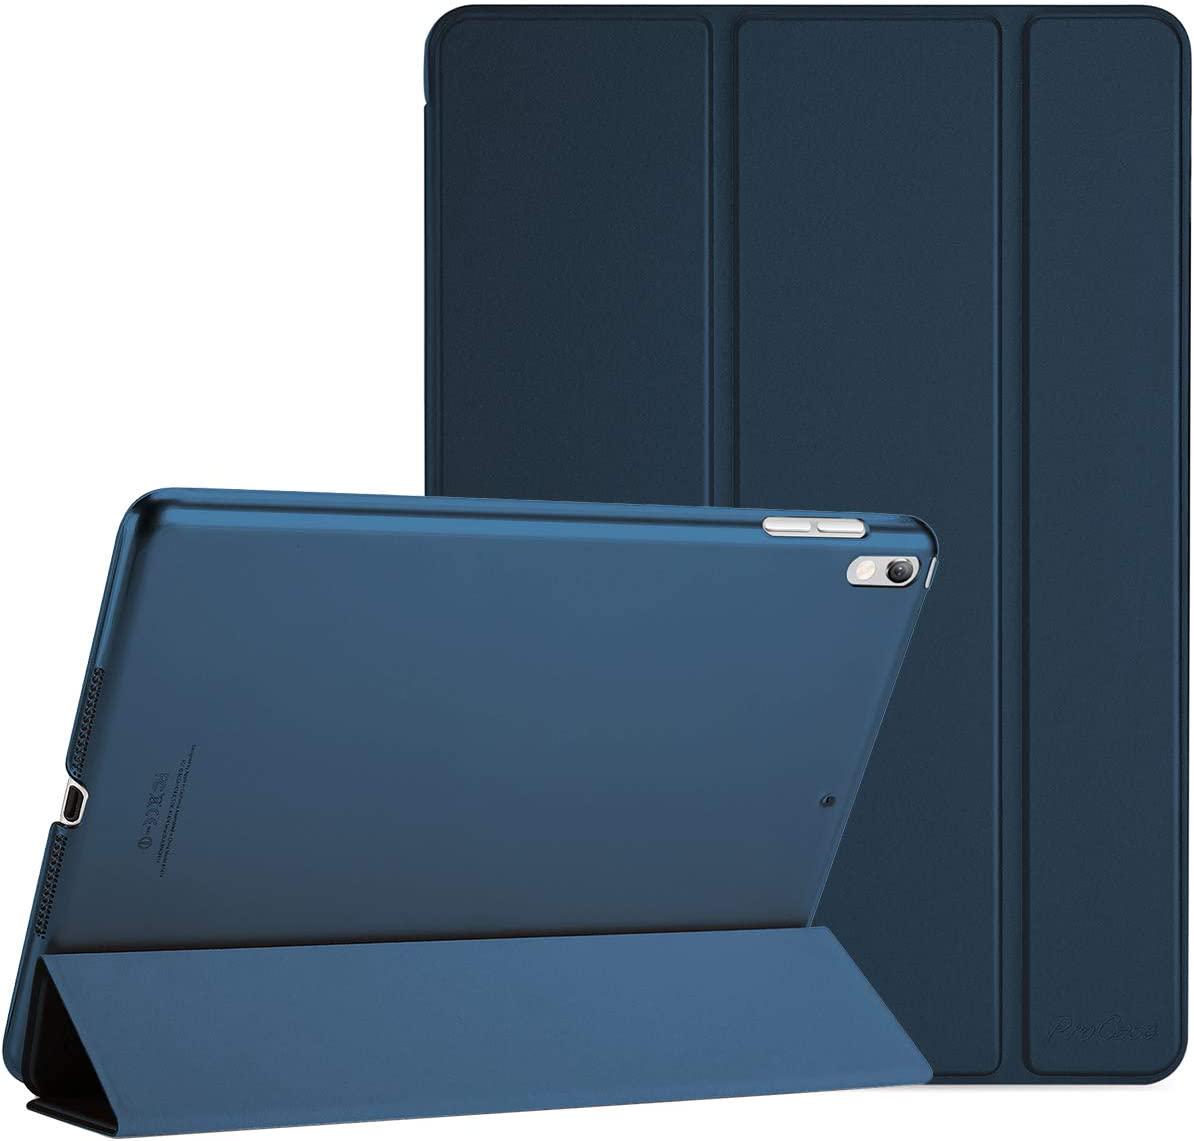 Procase, ProCase Apple 10.5 iPad Air (3rd Gen) 2019 iPad Pro Case 10.5 2017 - Ultra Slim Lightweight Stand Smart Case with Translucent Frosted Back Cover with Auto Sleep/Wake Feature Navy Blue